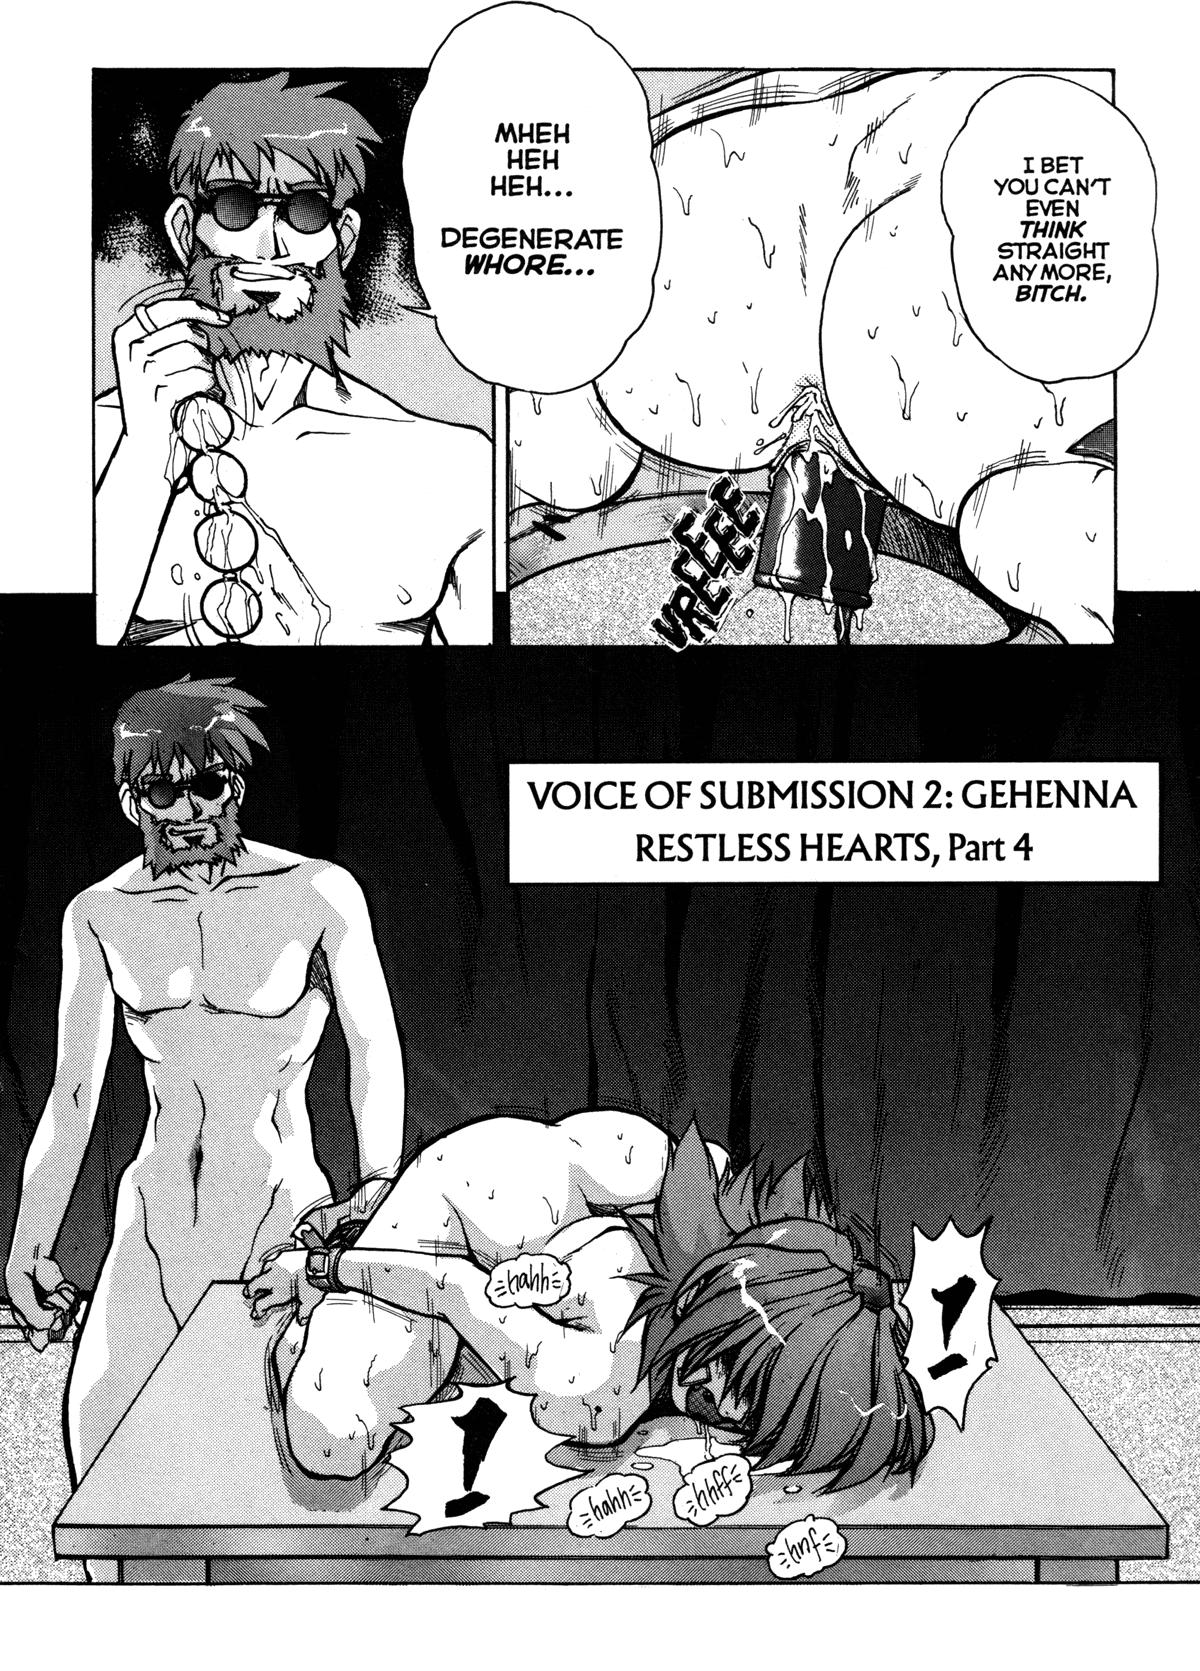 Voice of Submission II - Gehenna 04 7